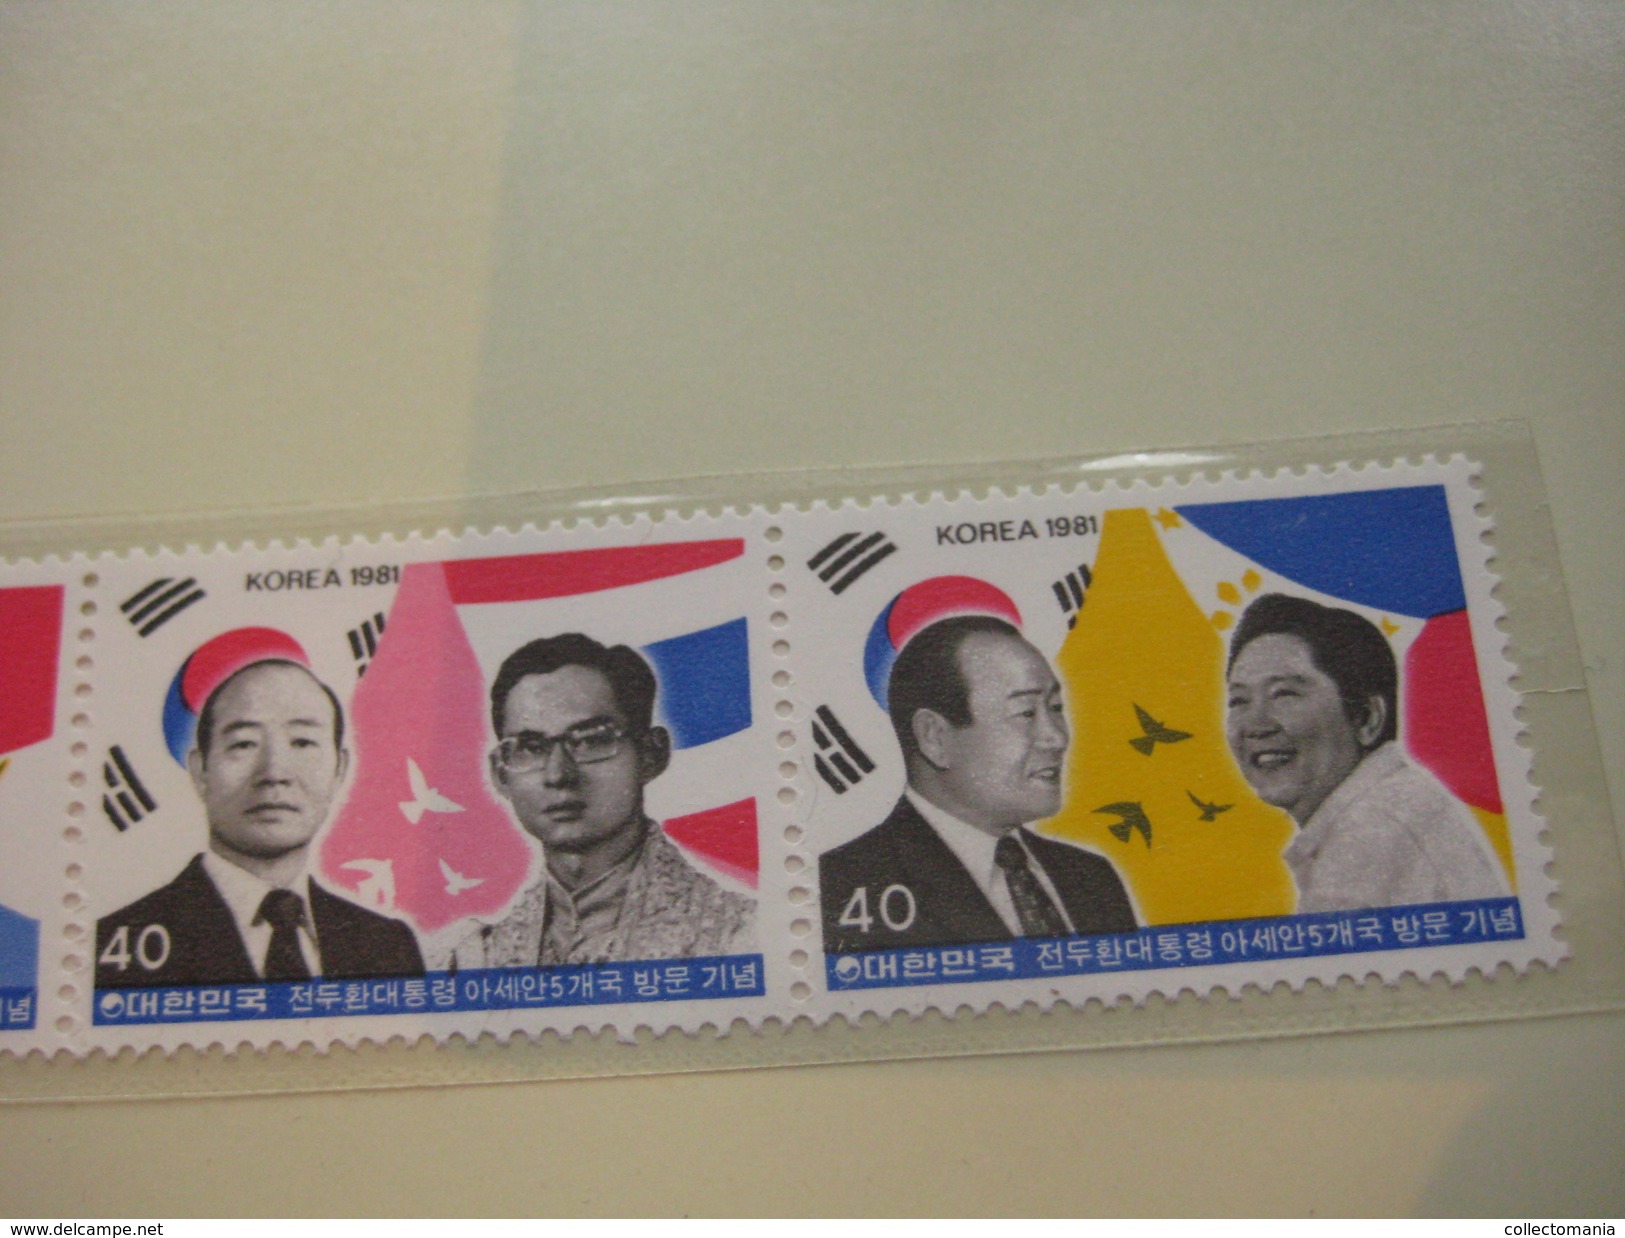 Republic of Korea postage stamps, as new , preserved in album -  compl. 1981 - Exc. condition - Ministry communications